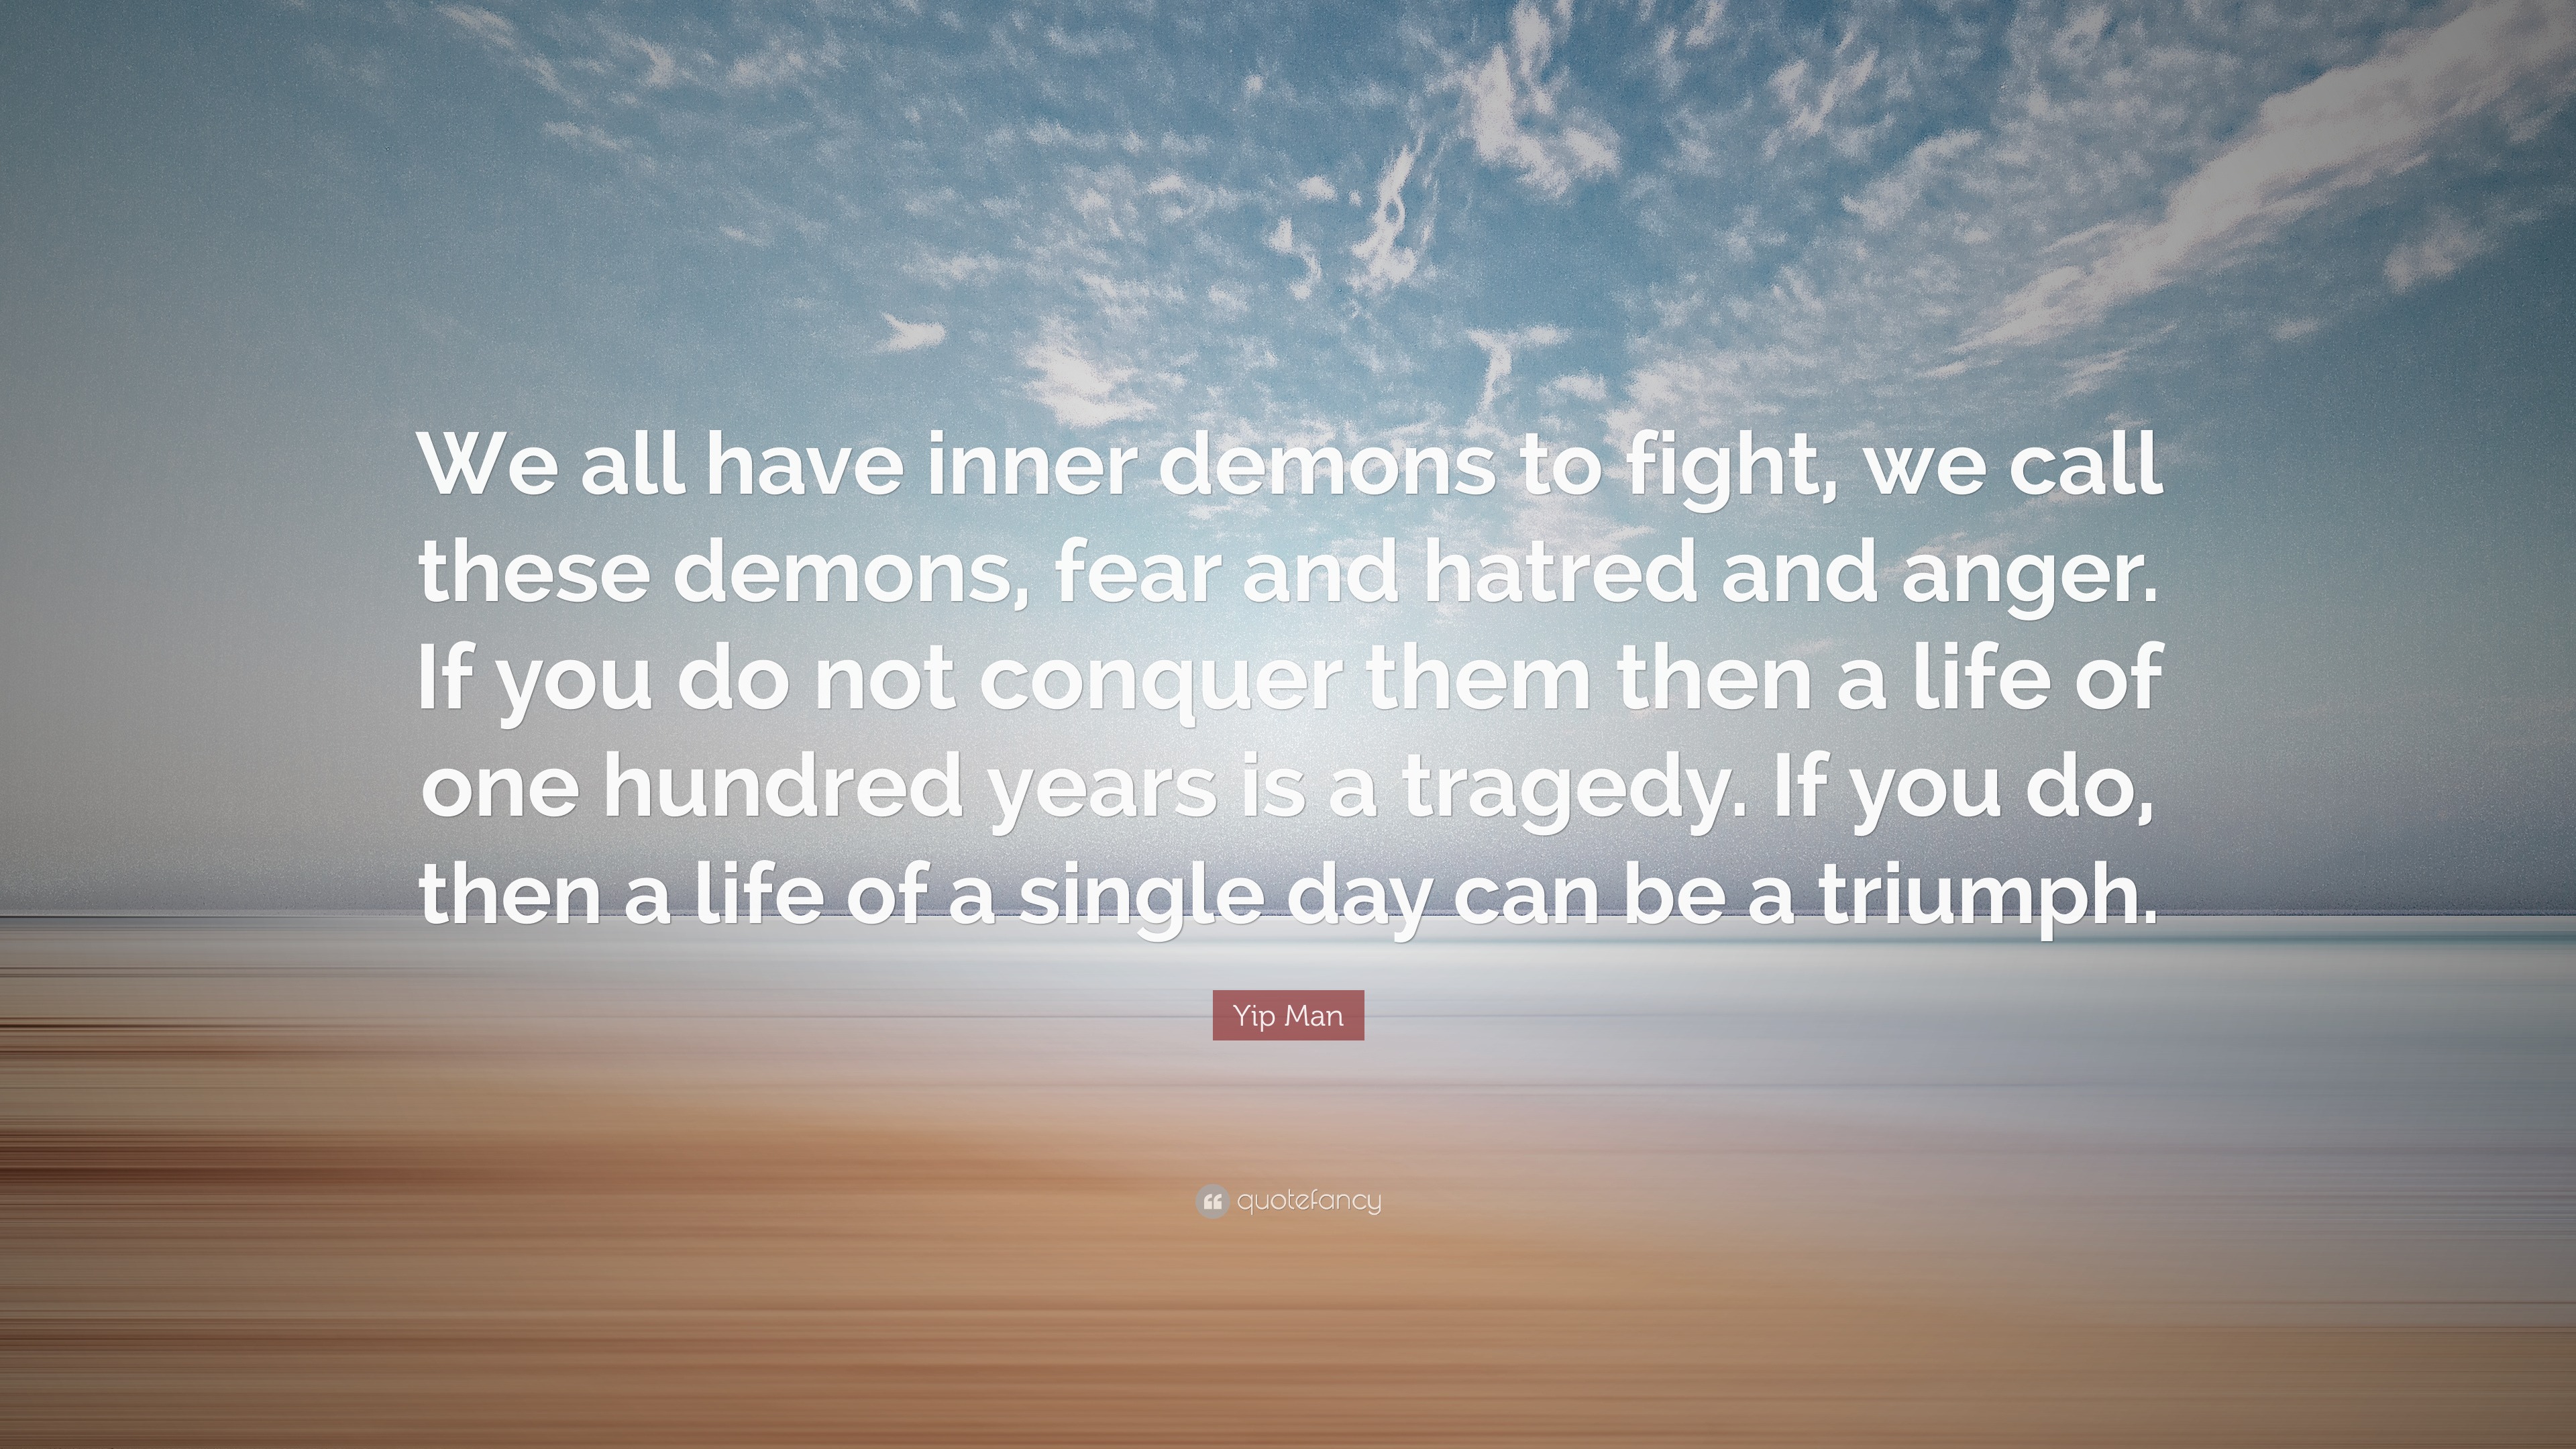 demons inner fight call quote yip fear hatred anger conquer then wallpapers them tragedy triumph single quotefancy hundred